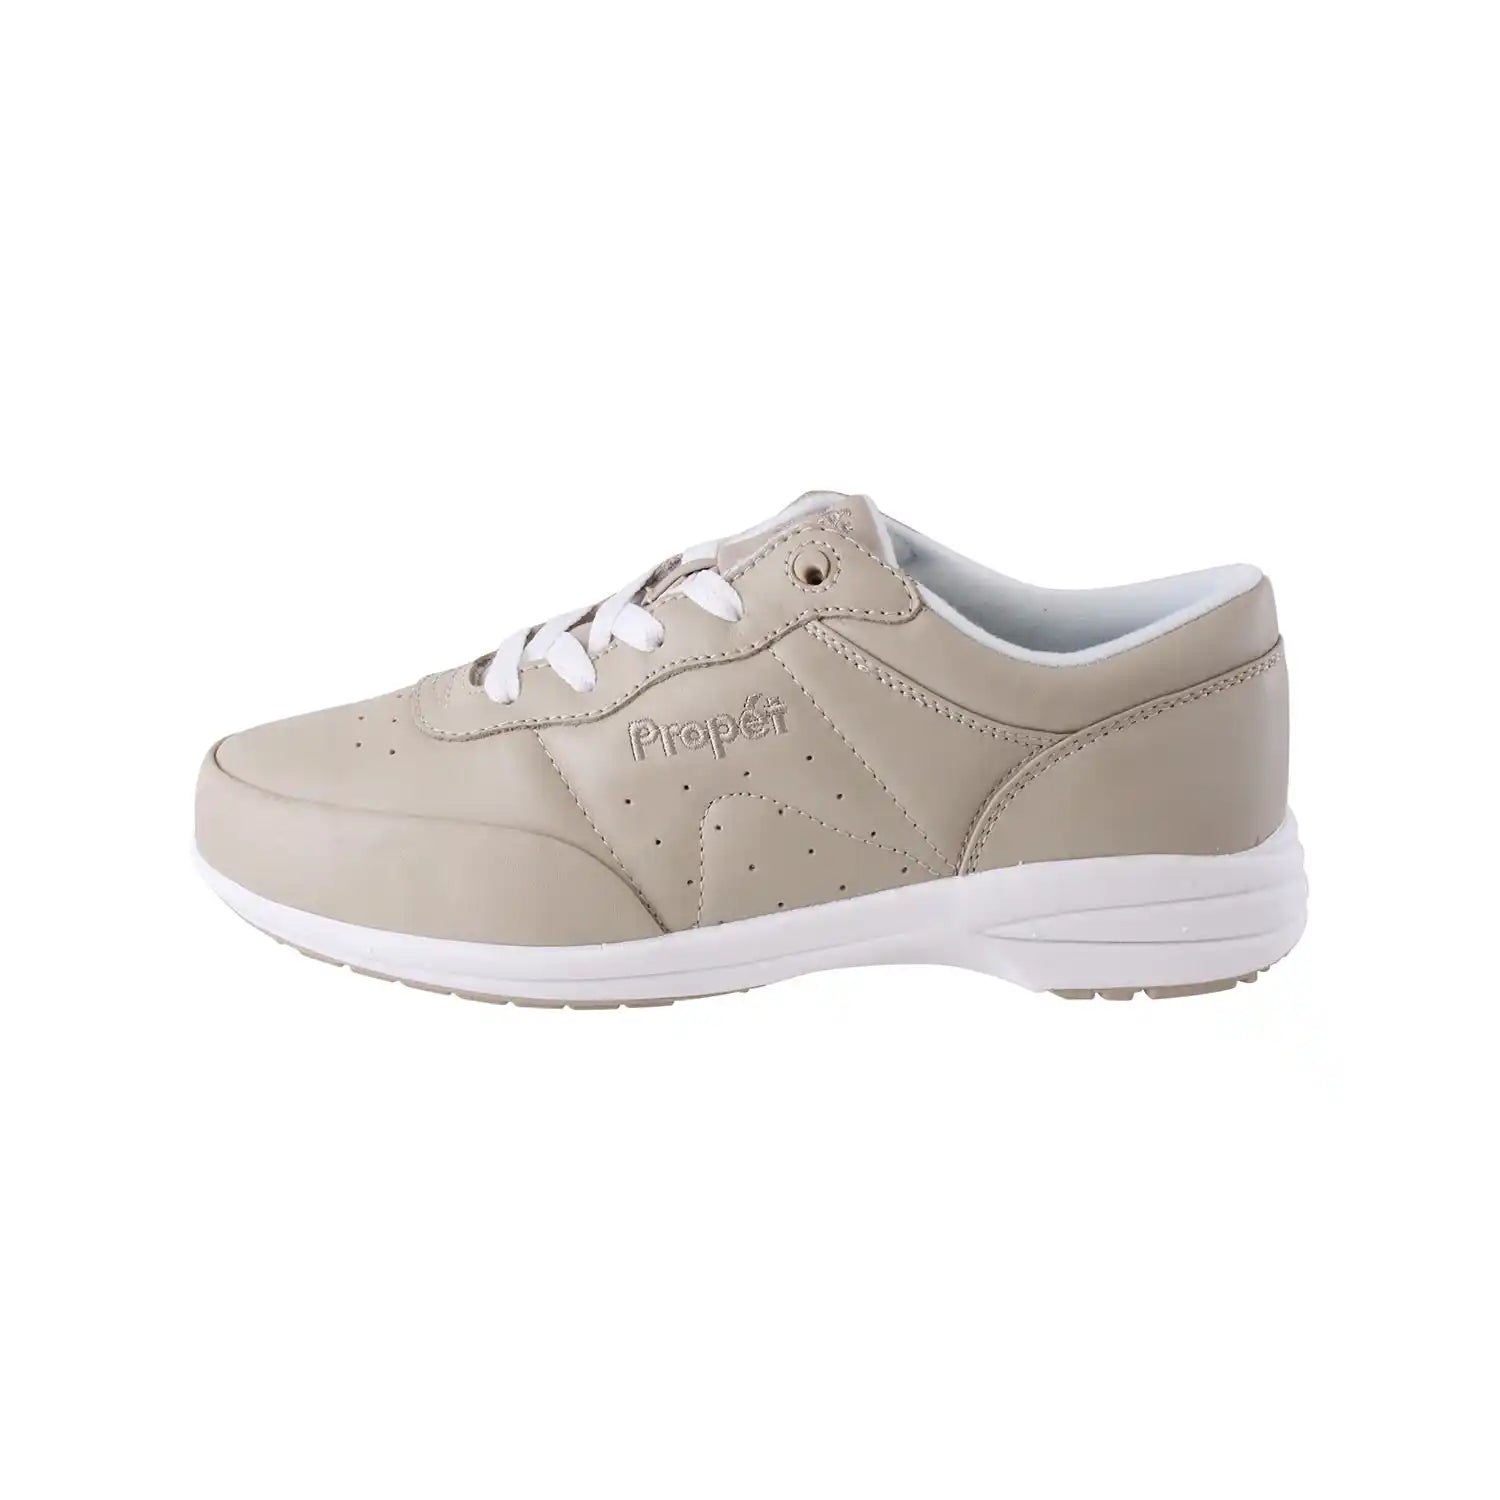 Propet Bone Leather Trainers - White 2 Shaws Department Stores